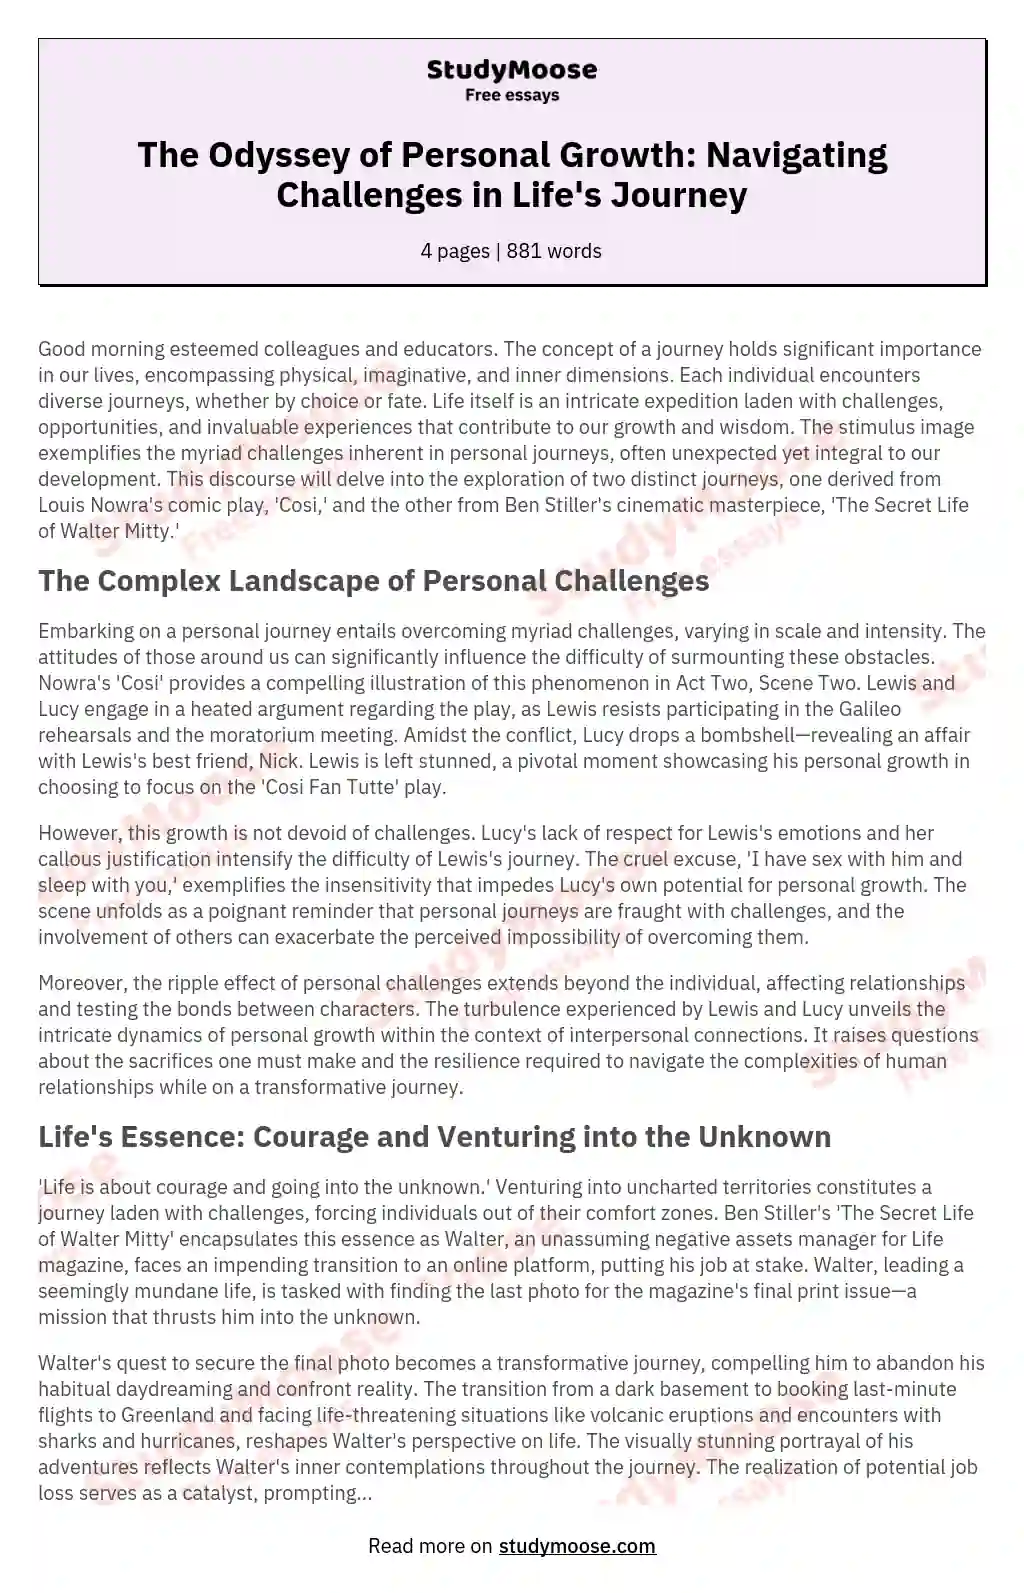 The Odyssey of Personal Growth: Navigating Challenges in Life's Journey essay